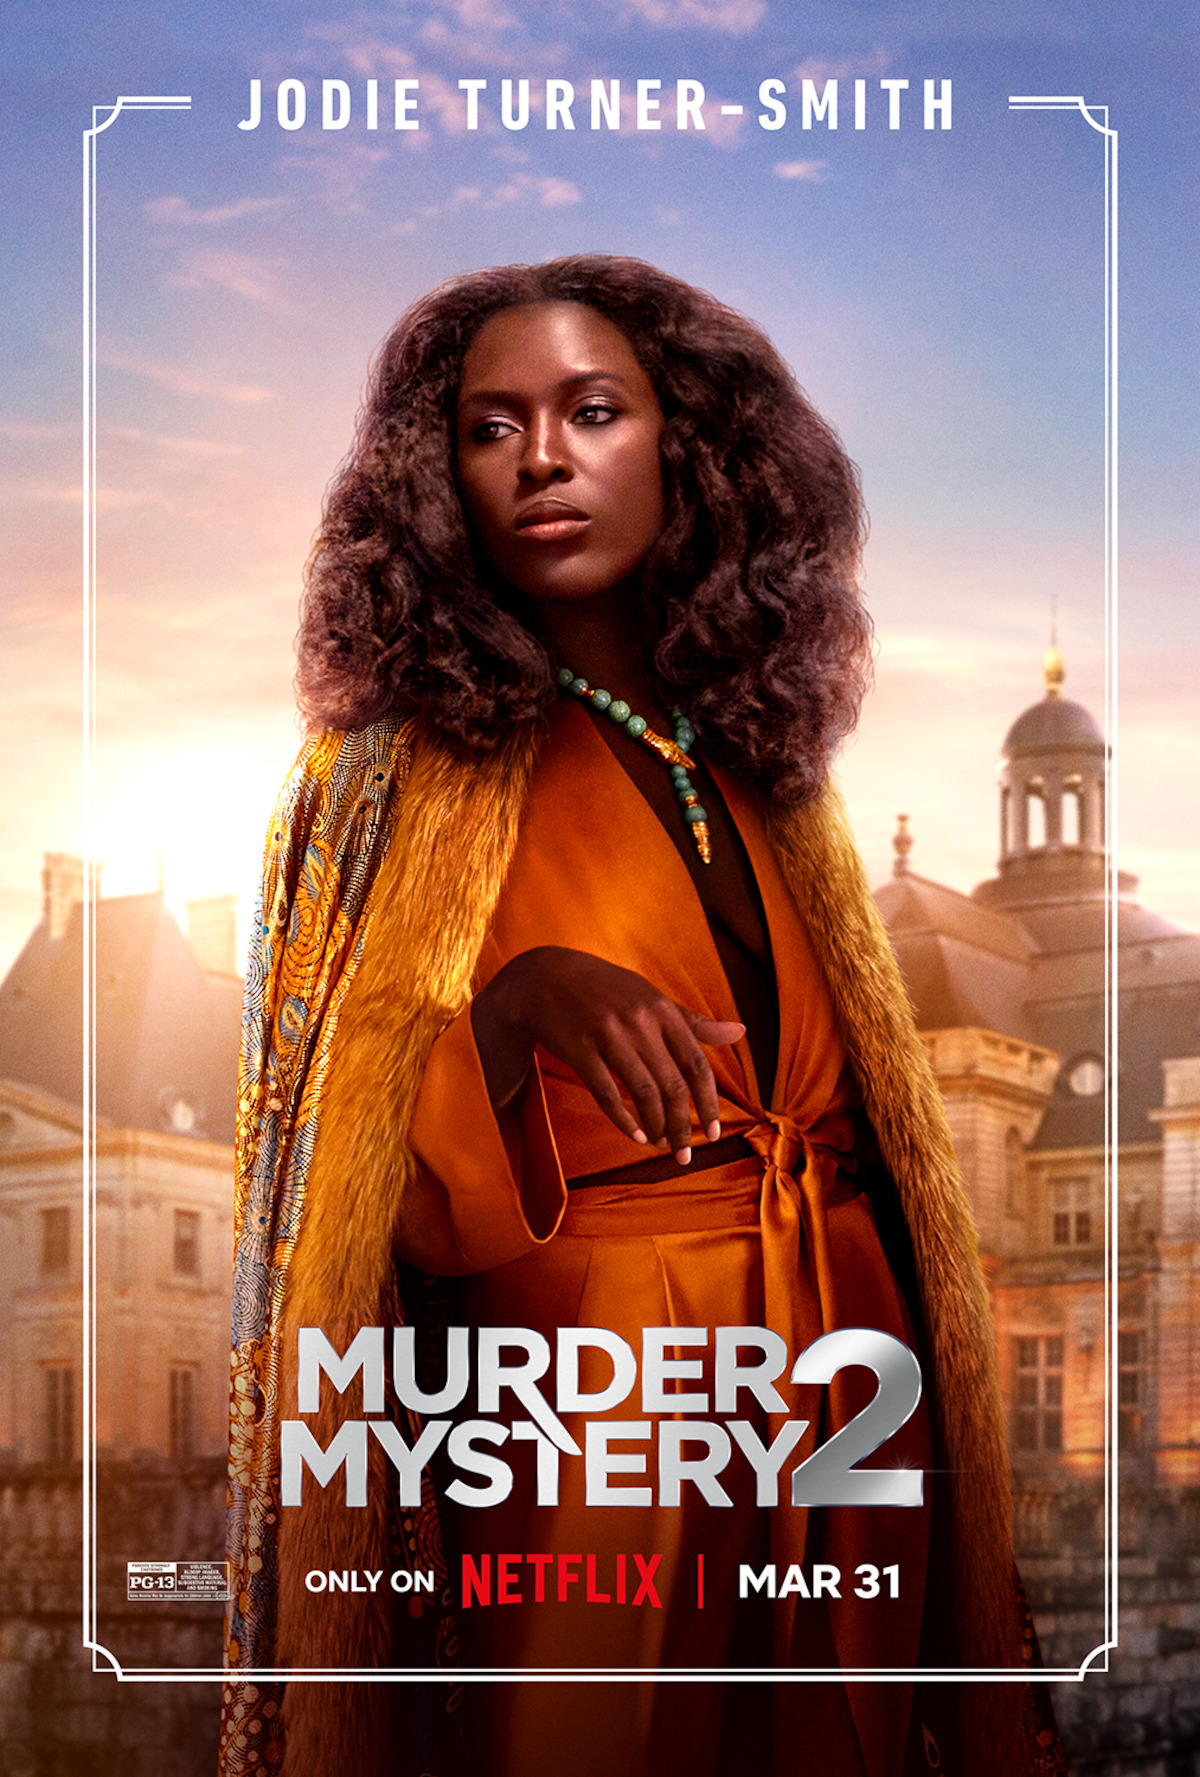 Murder Mystery 2 release date, cast and more